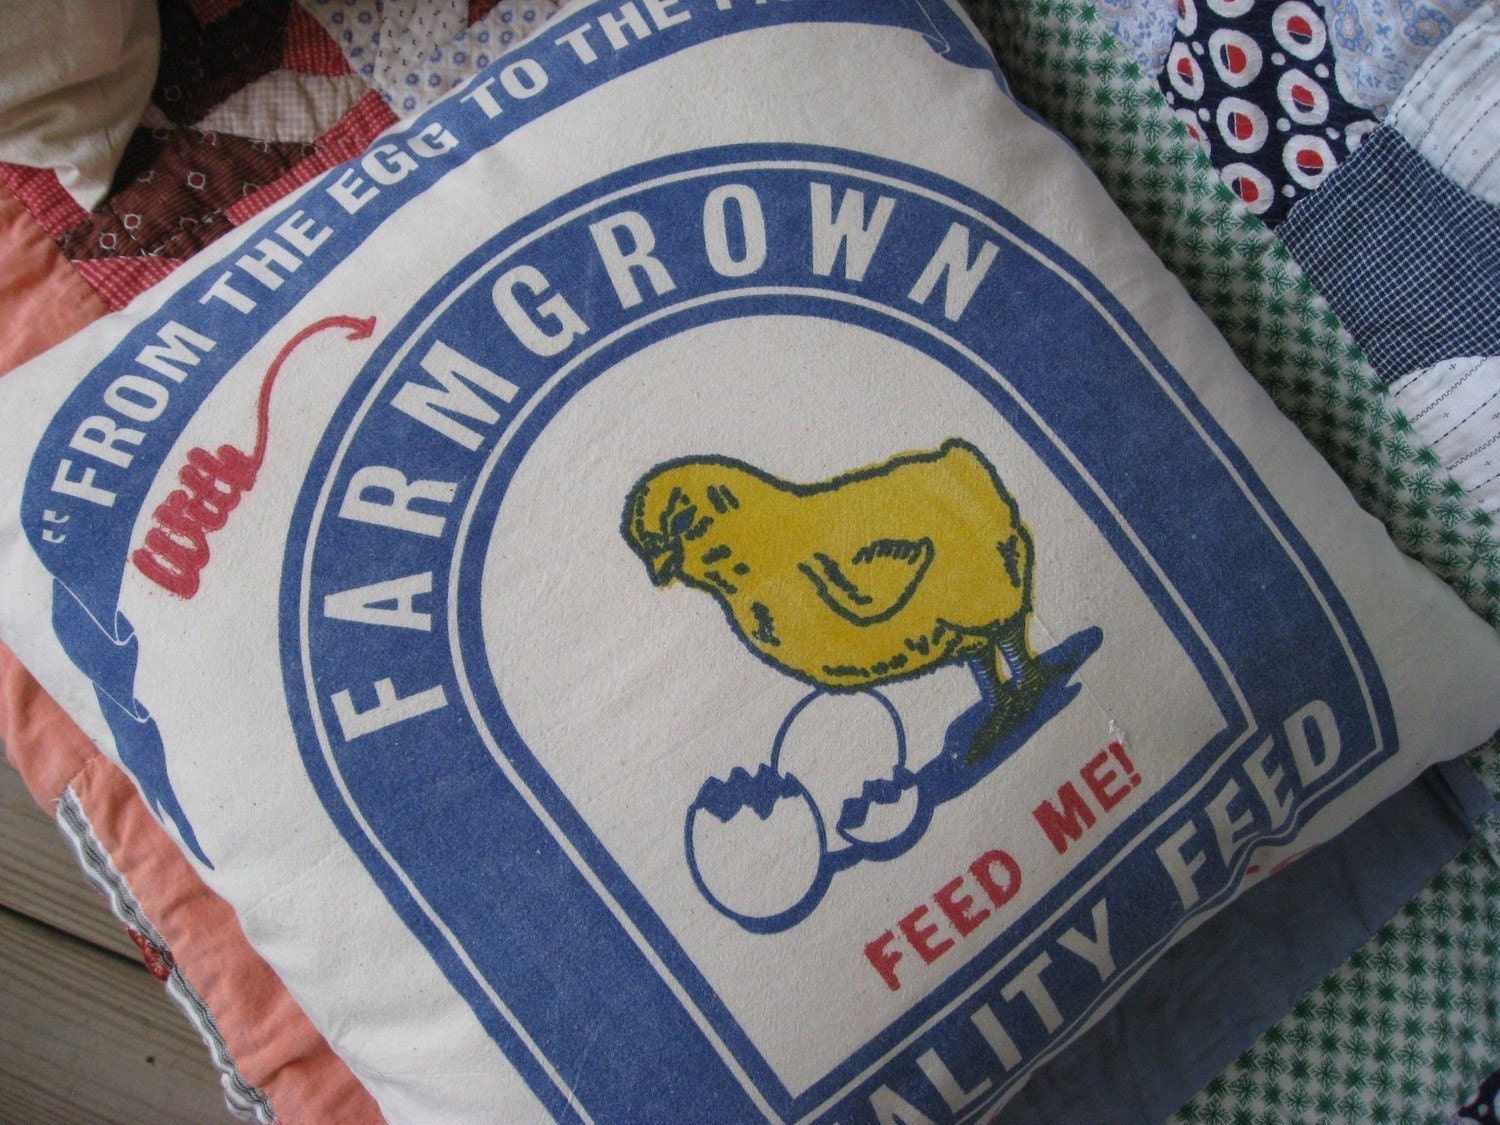 ON SALE - Chicken Feed Pillow  - Feed Me with Farm Grown Quality Food - Cute Yellow Chick - Grain Sack Pillow